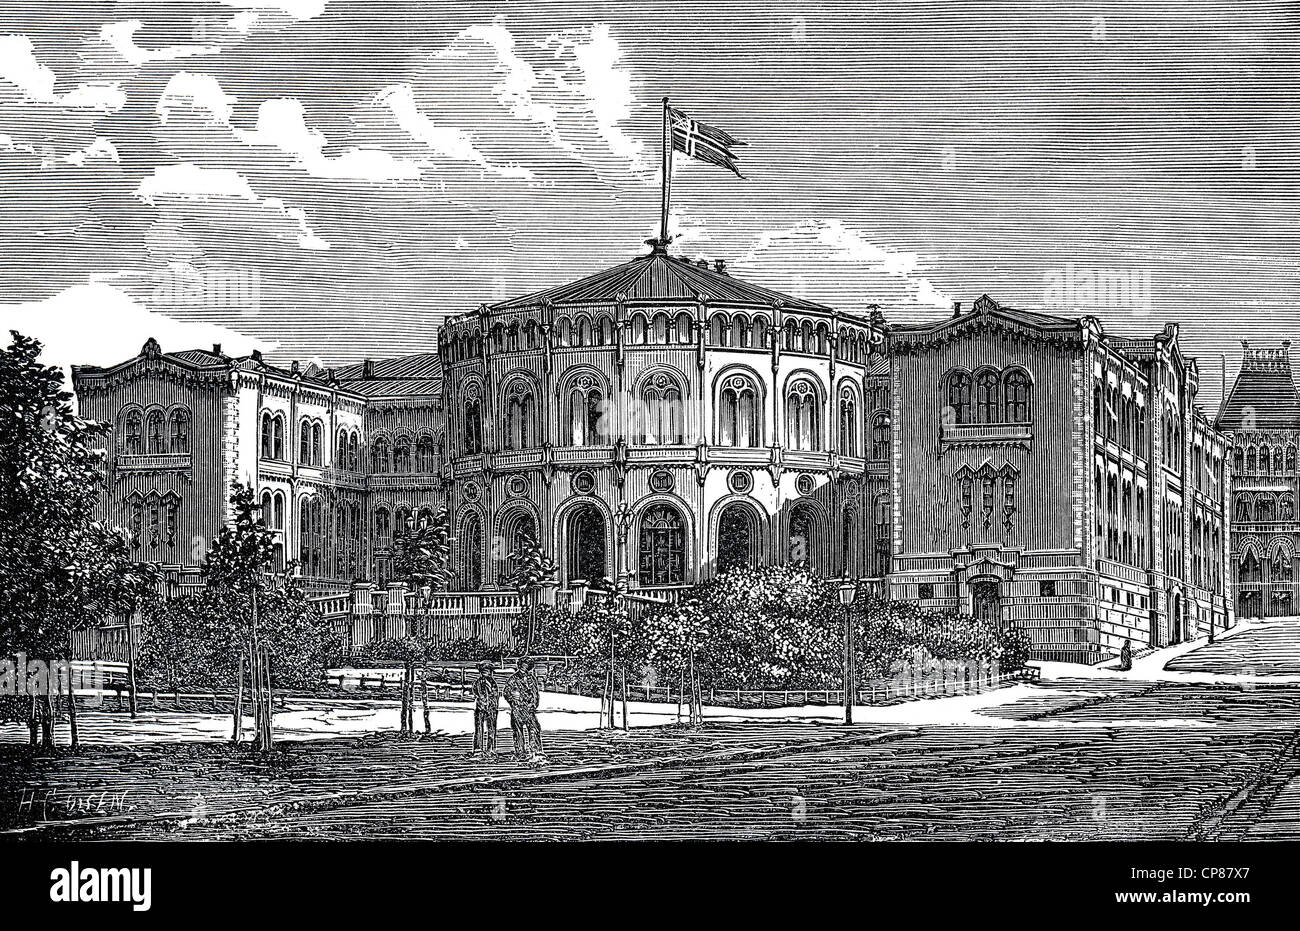 Storting, Parliament of Norway, Oslo or Christiania or Kristiania, historic engraving from 19th Century, Das Storting oder Stort Stock Photo